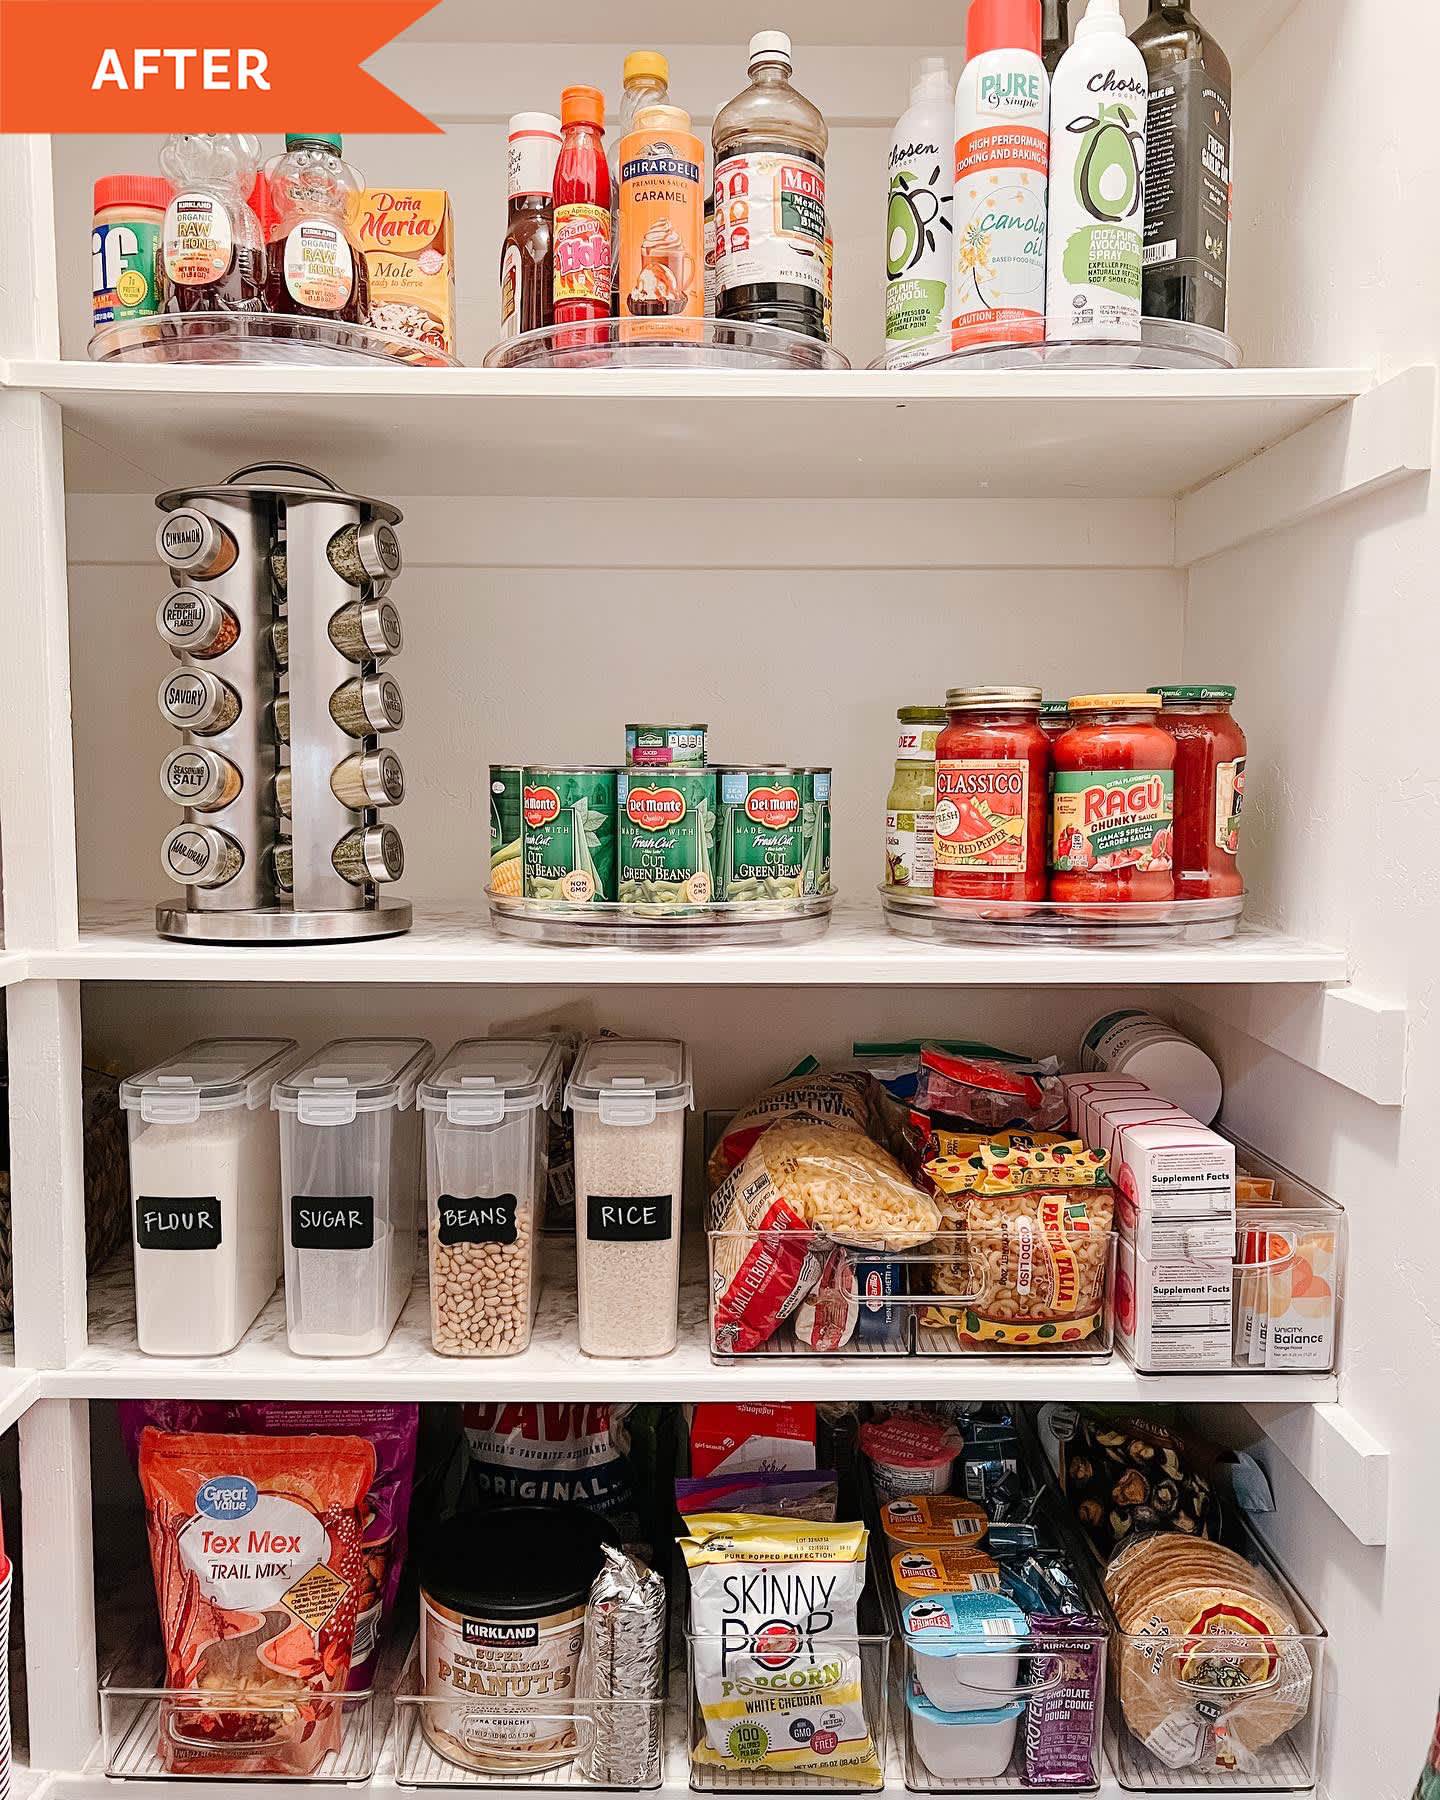 https://cdn.apartmenttherapy.info/image/upload/v1661788896/at/organize-clean/before-after/Bianca%20Delatorre%20Pantry/BiancaDelatorre_111372801_53A4873AC5BA43DAA15C24E1CA7AD44D.jpg